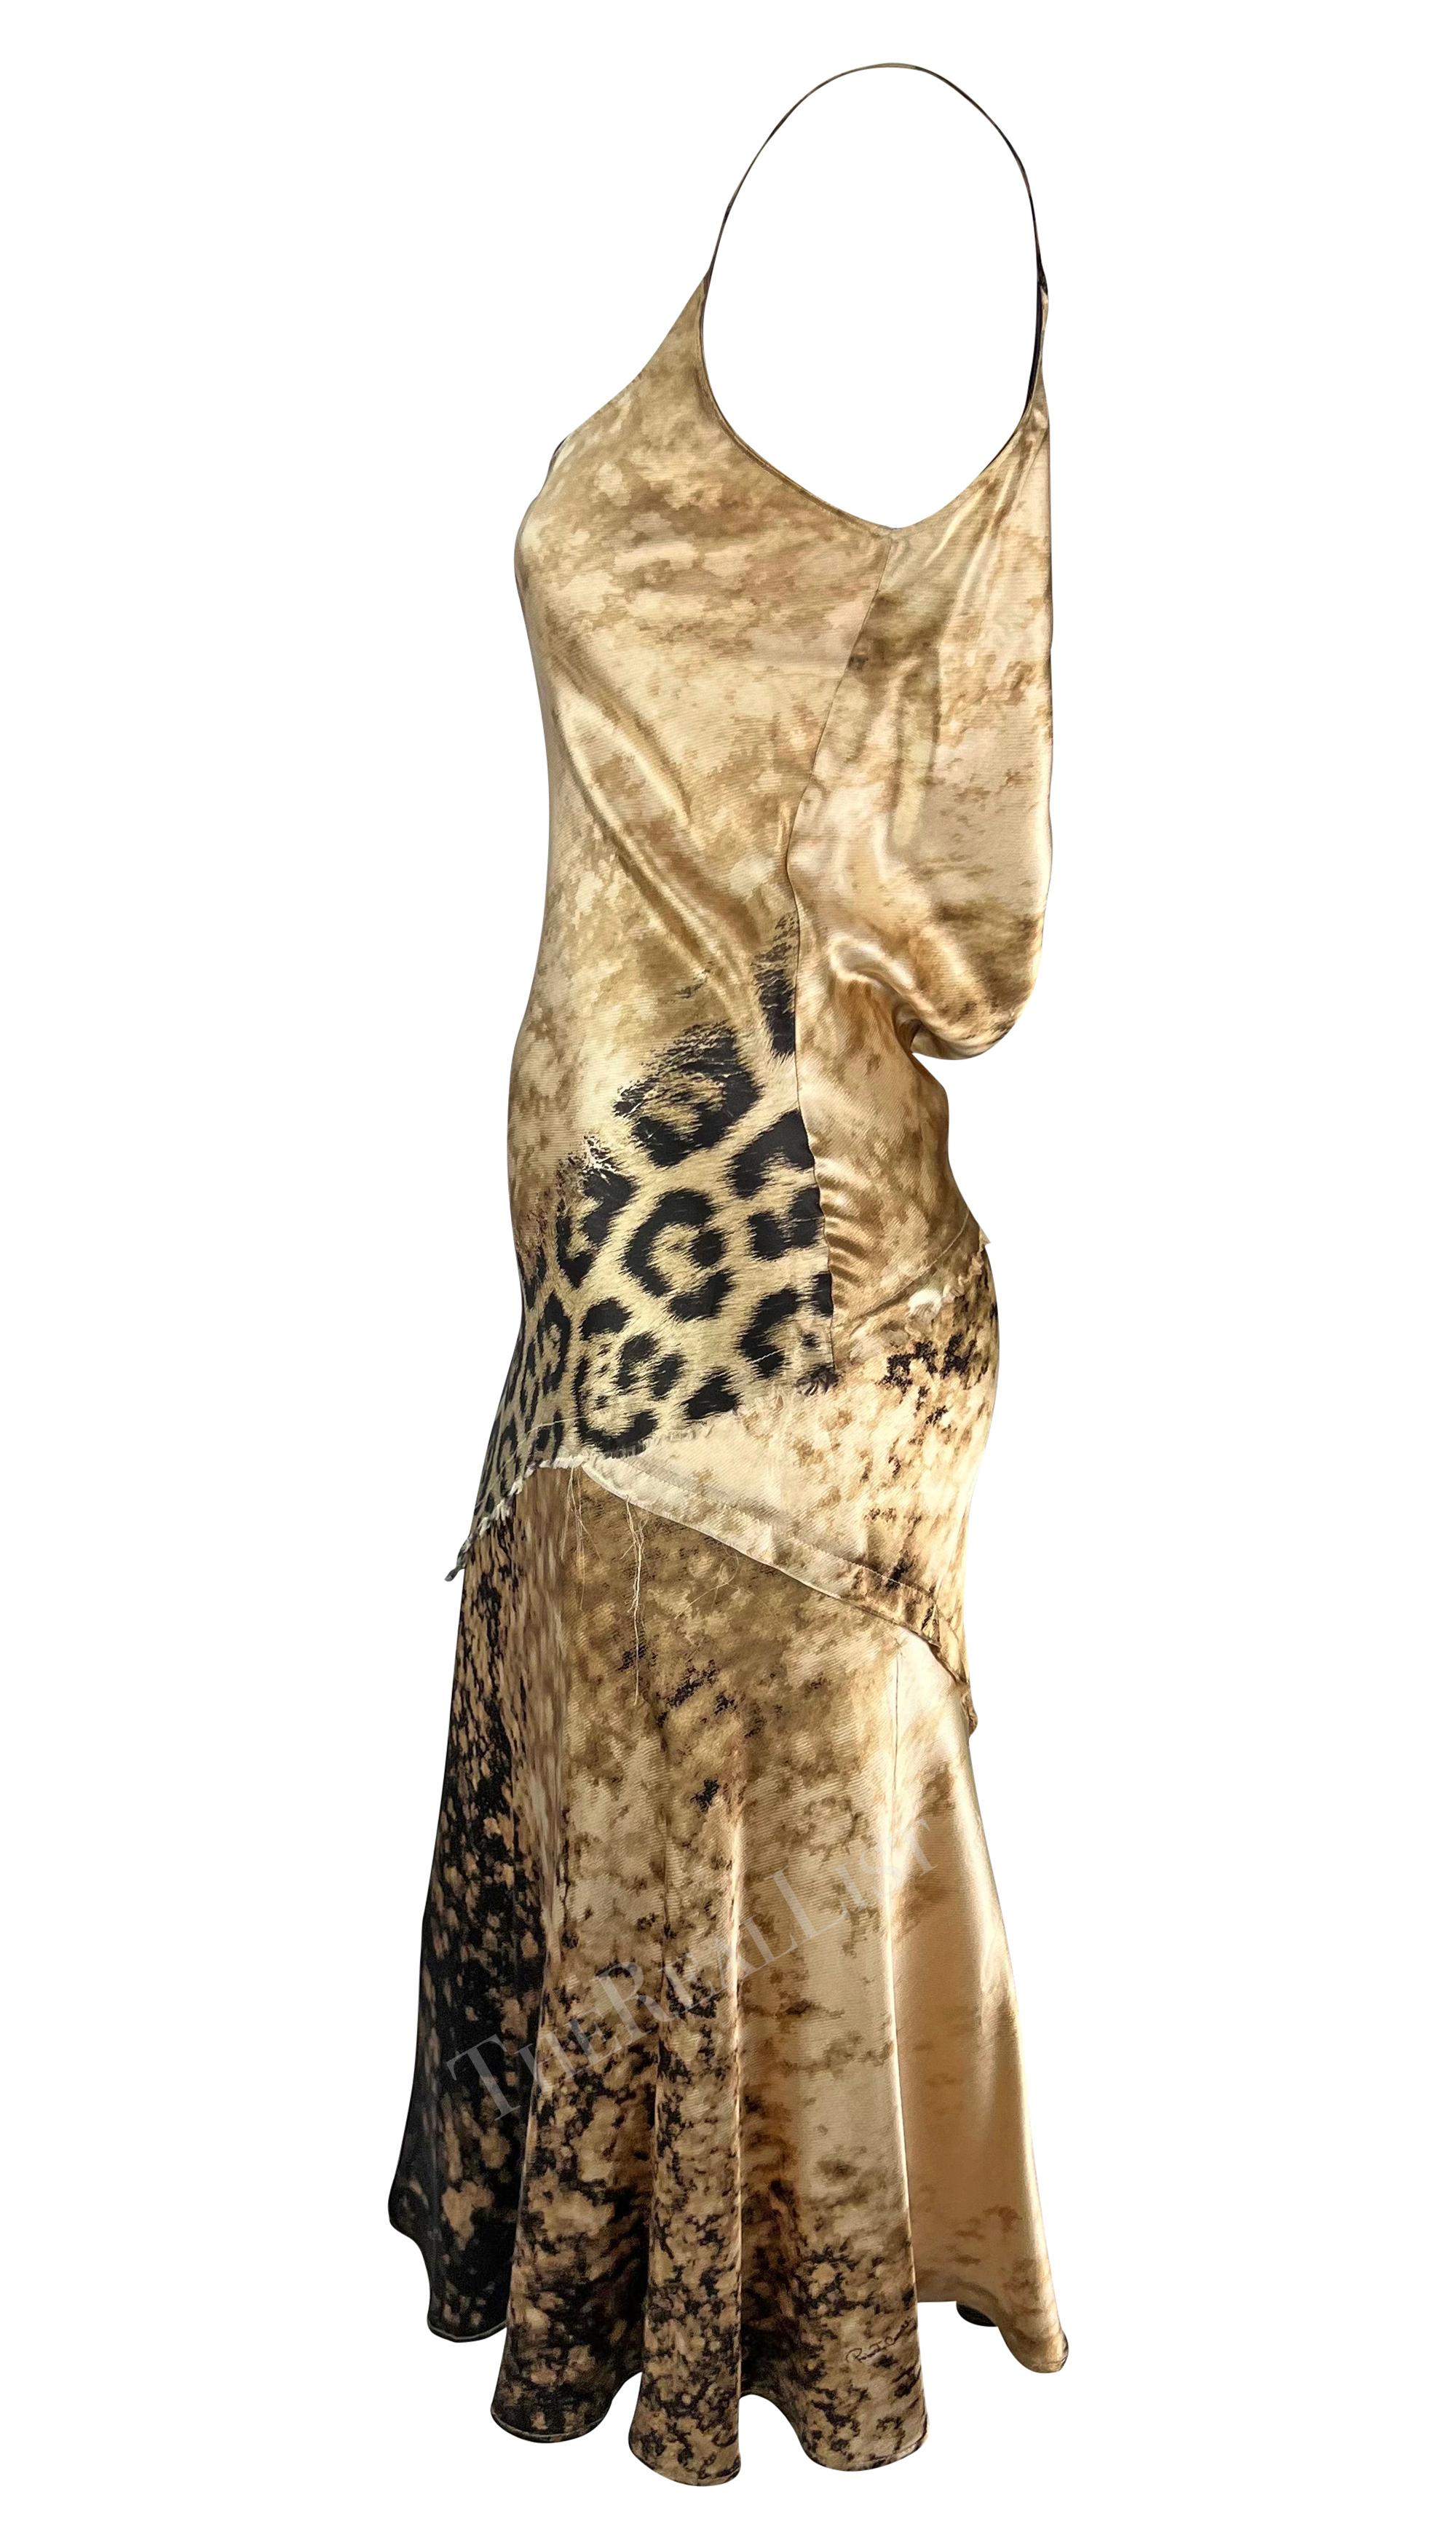 Presenting a stunning beige silk Roberto Cavalli slip dress. From the early 2000s, this gorgeous dress is covered in a tan abstract and leopard print. The dress features a scoop neckline, spaghetti straps, a flared hem, and a draped accent at the